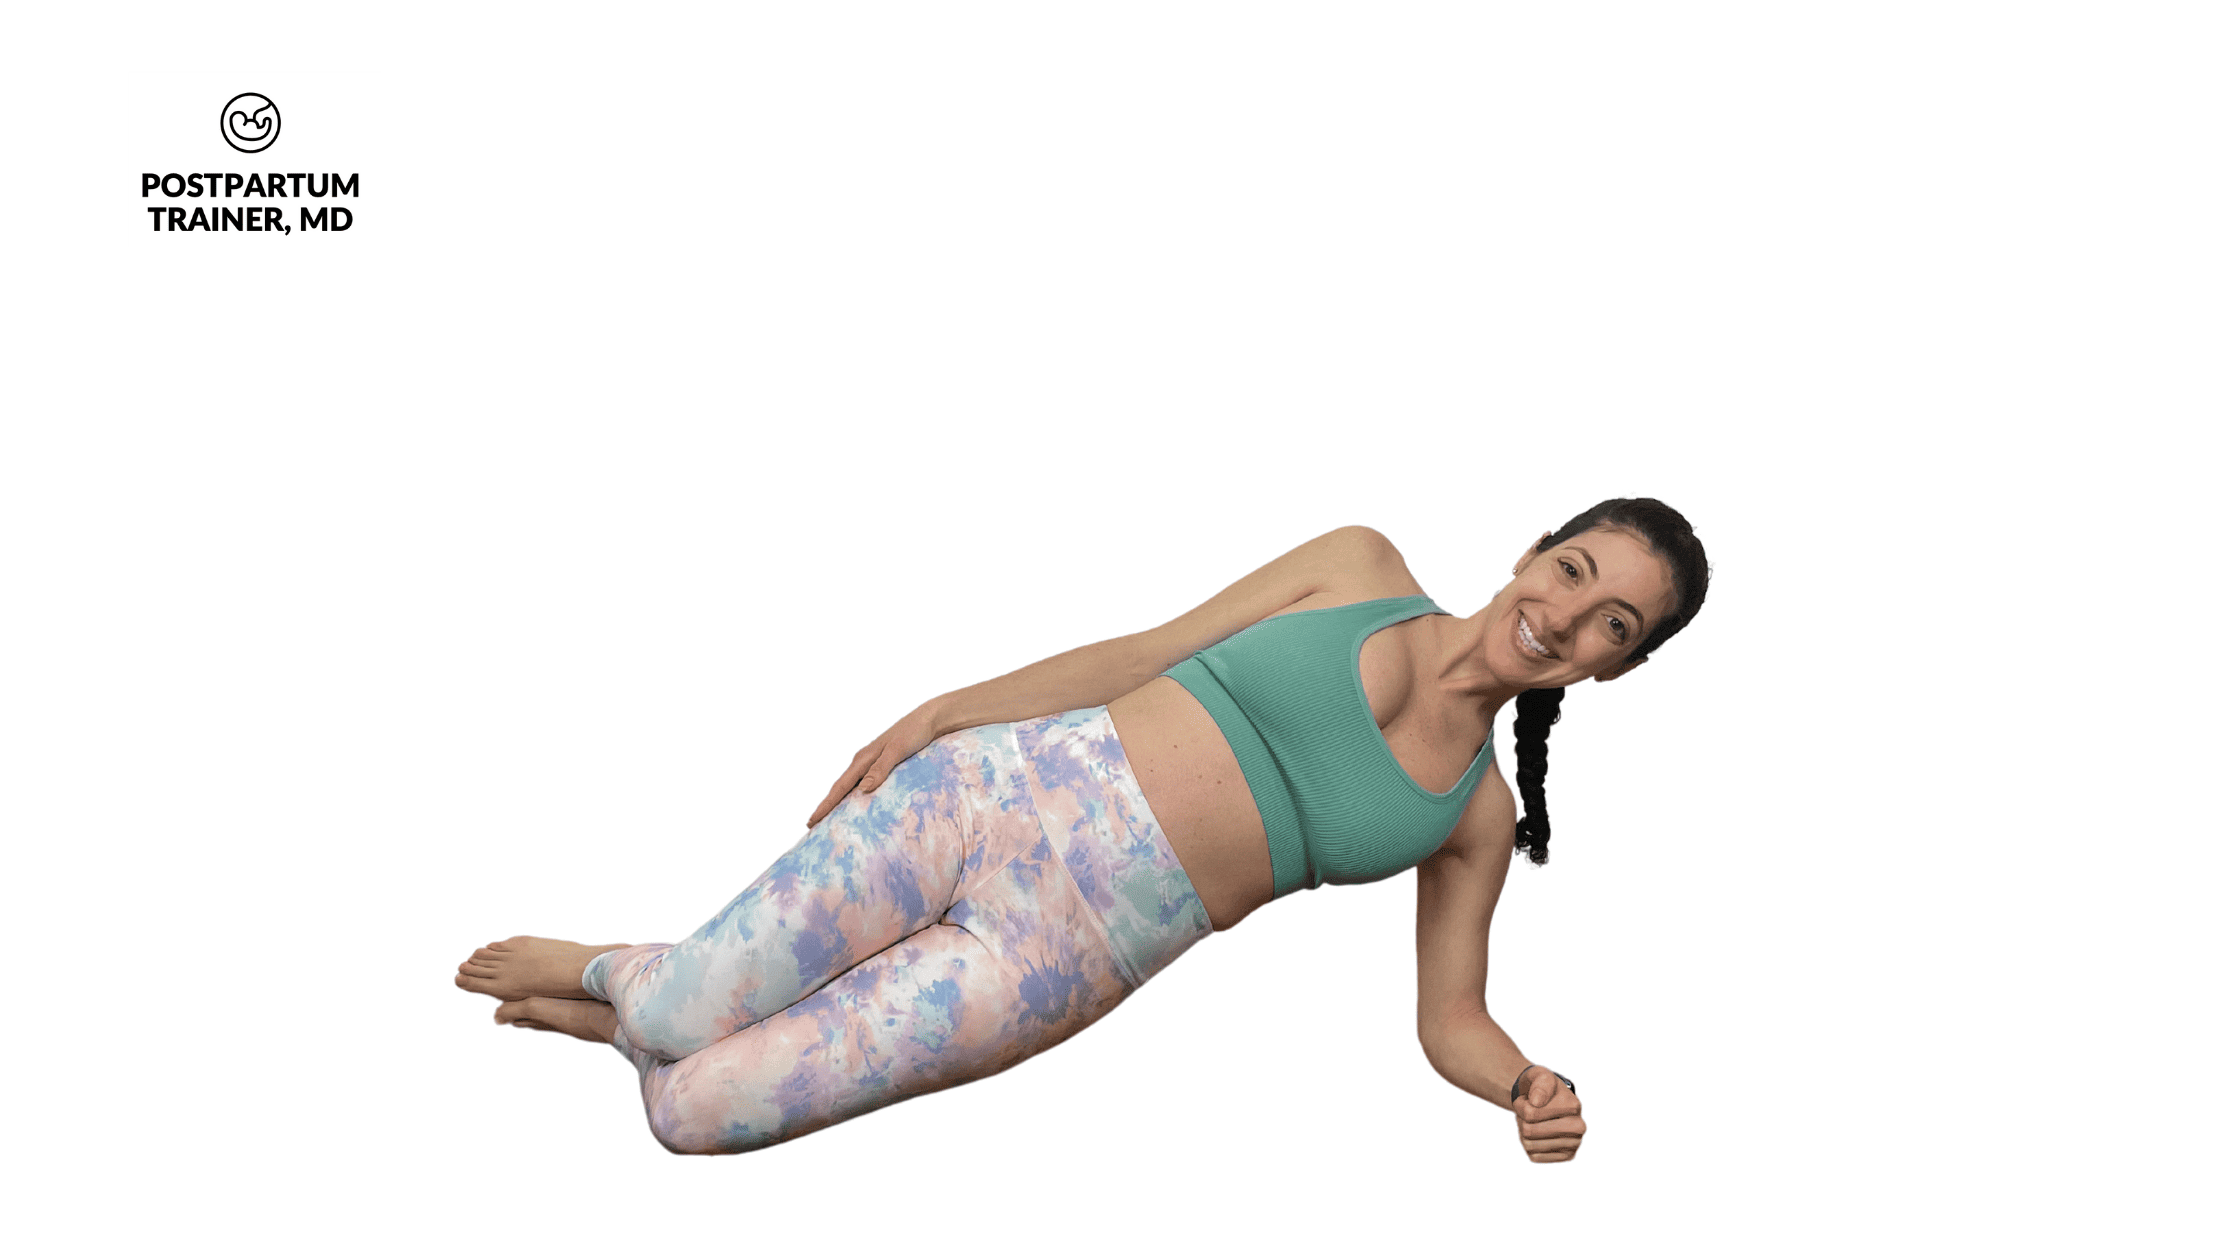 Pregnant woman performing side lying side plank with knees bent